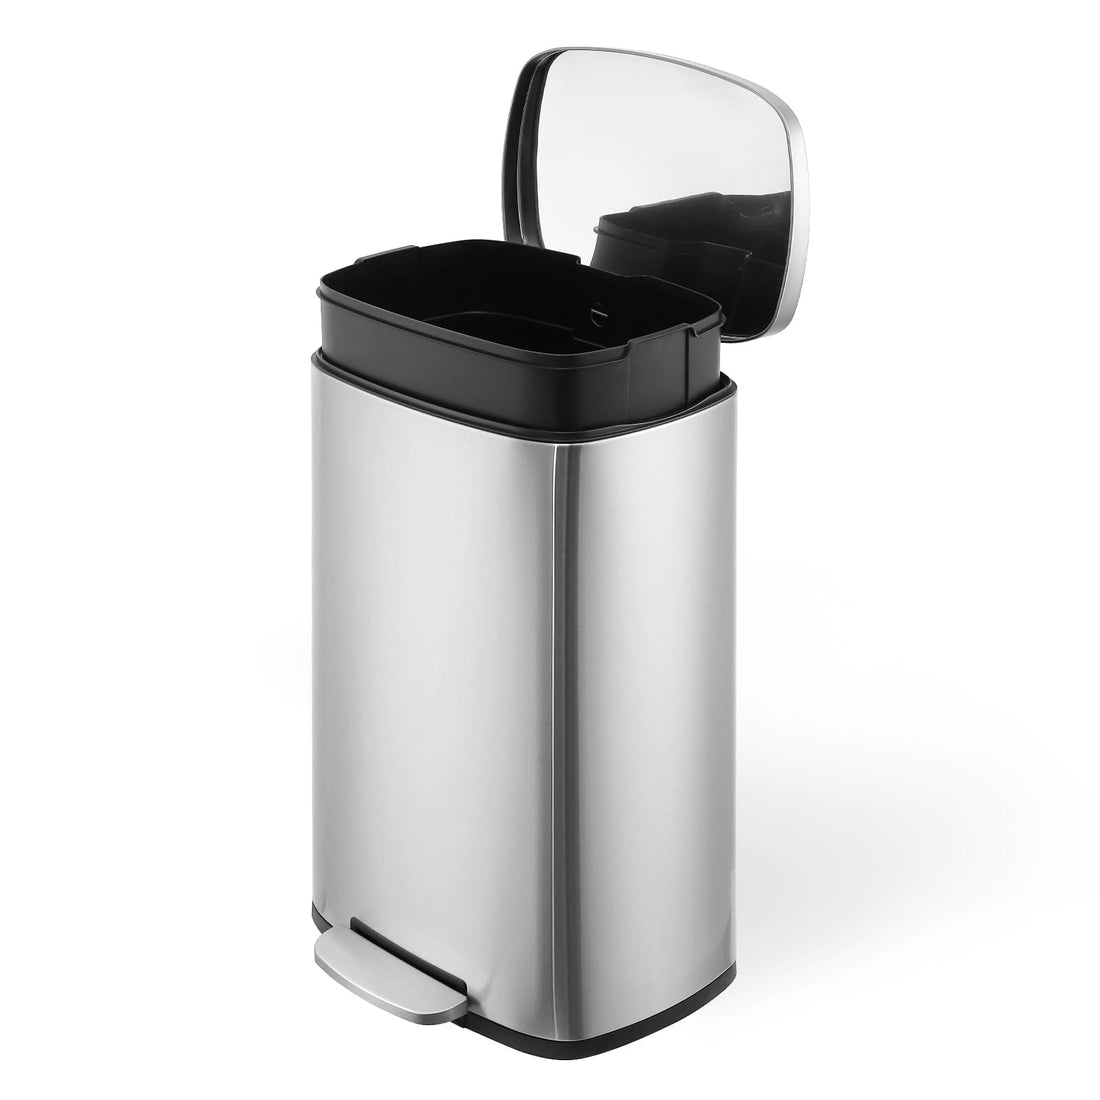 50L Smudge-Resistant Kitchen Trash Can with Foot Pedal